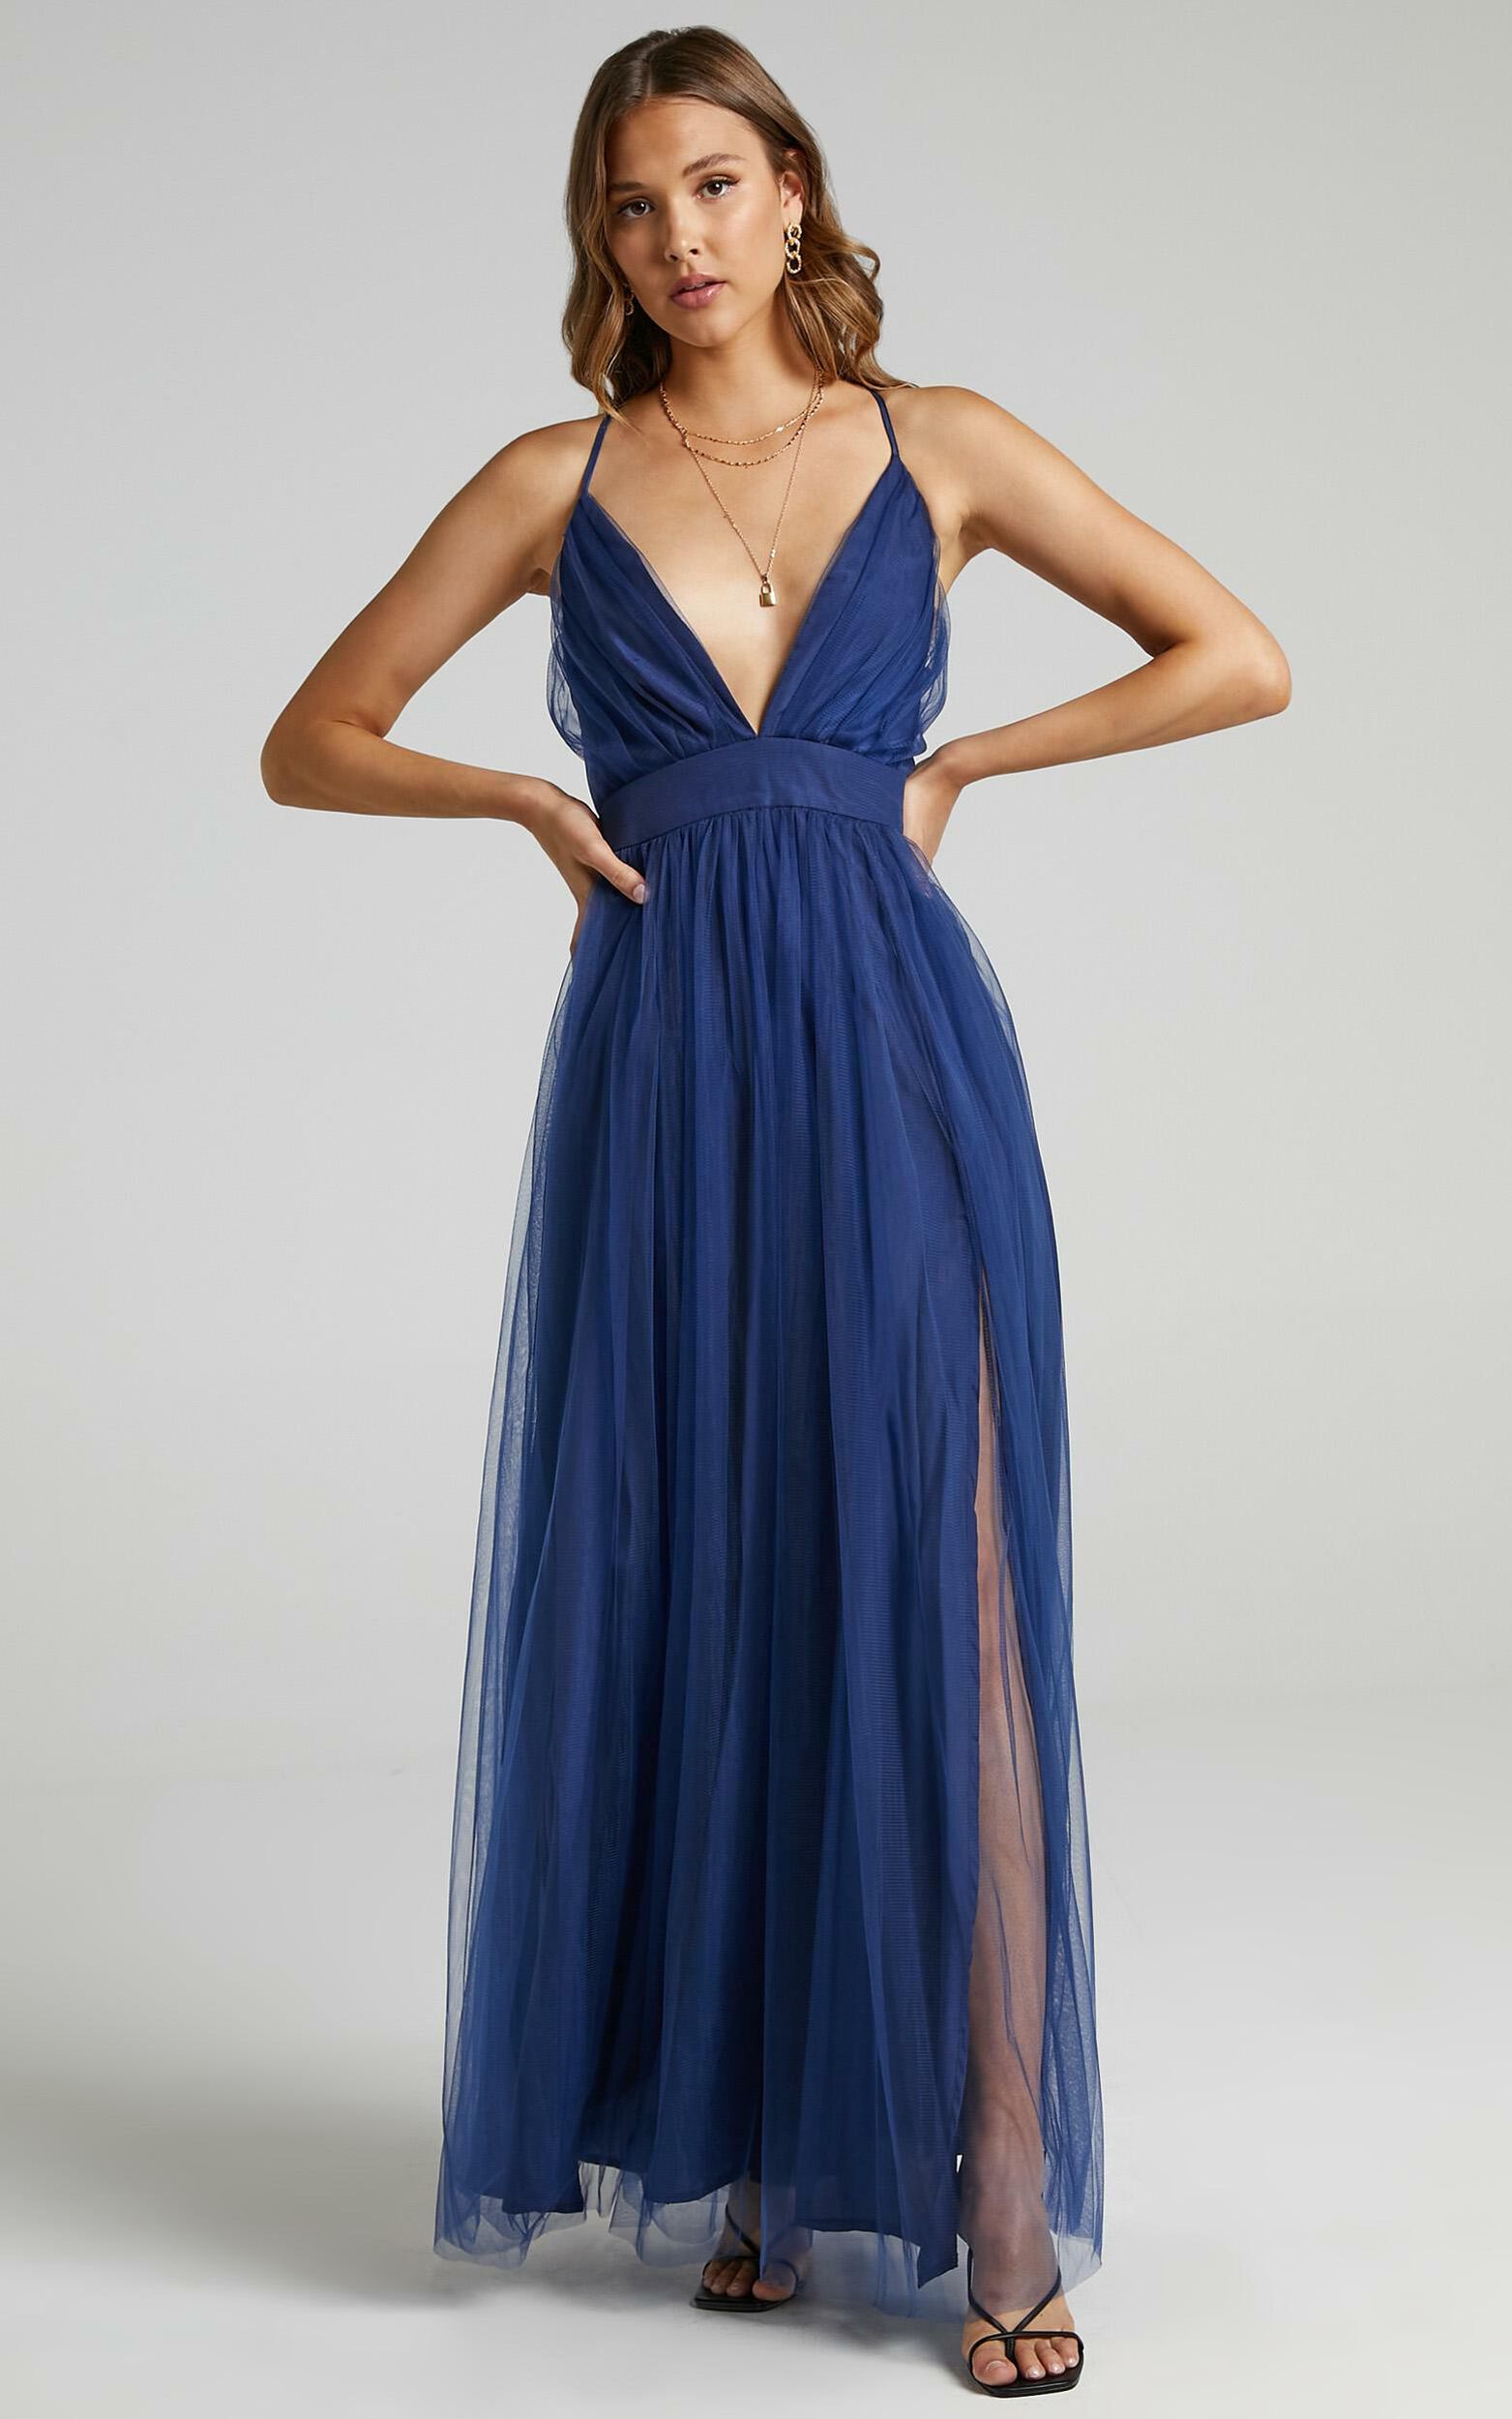 Tell Me Lies Midaxi Dress - Plunge Cross Back Dress in Navy Tulle - 04, NVY3